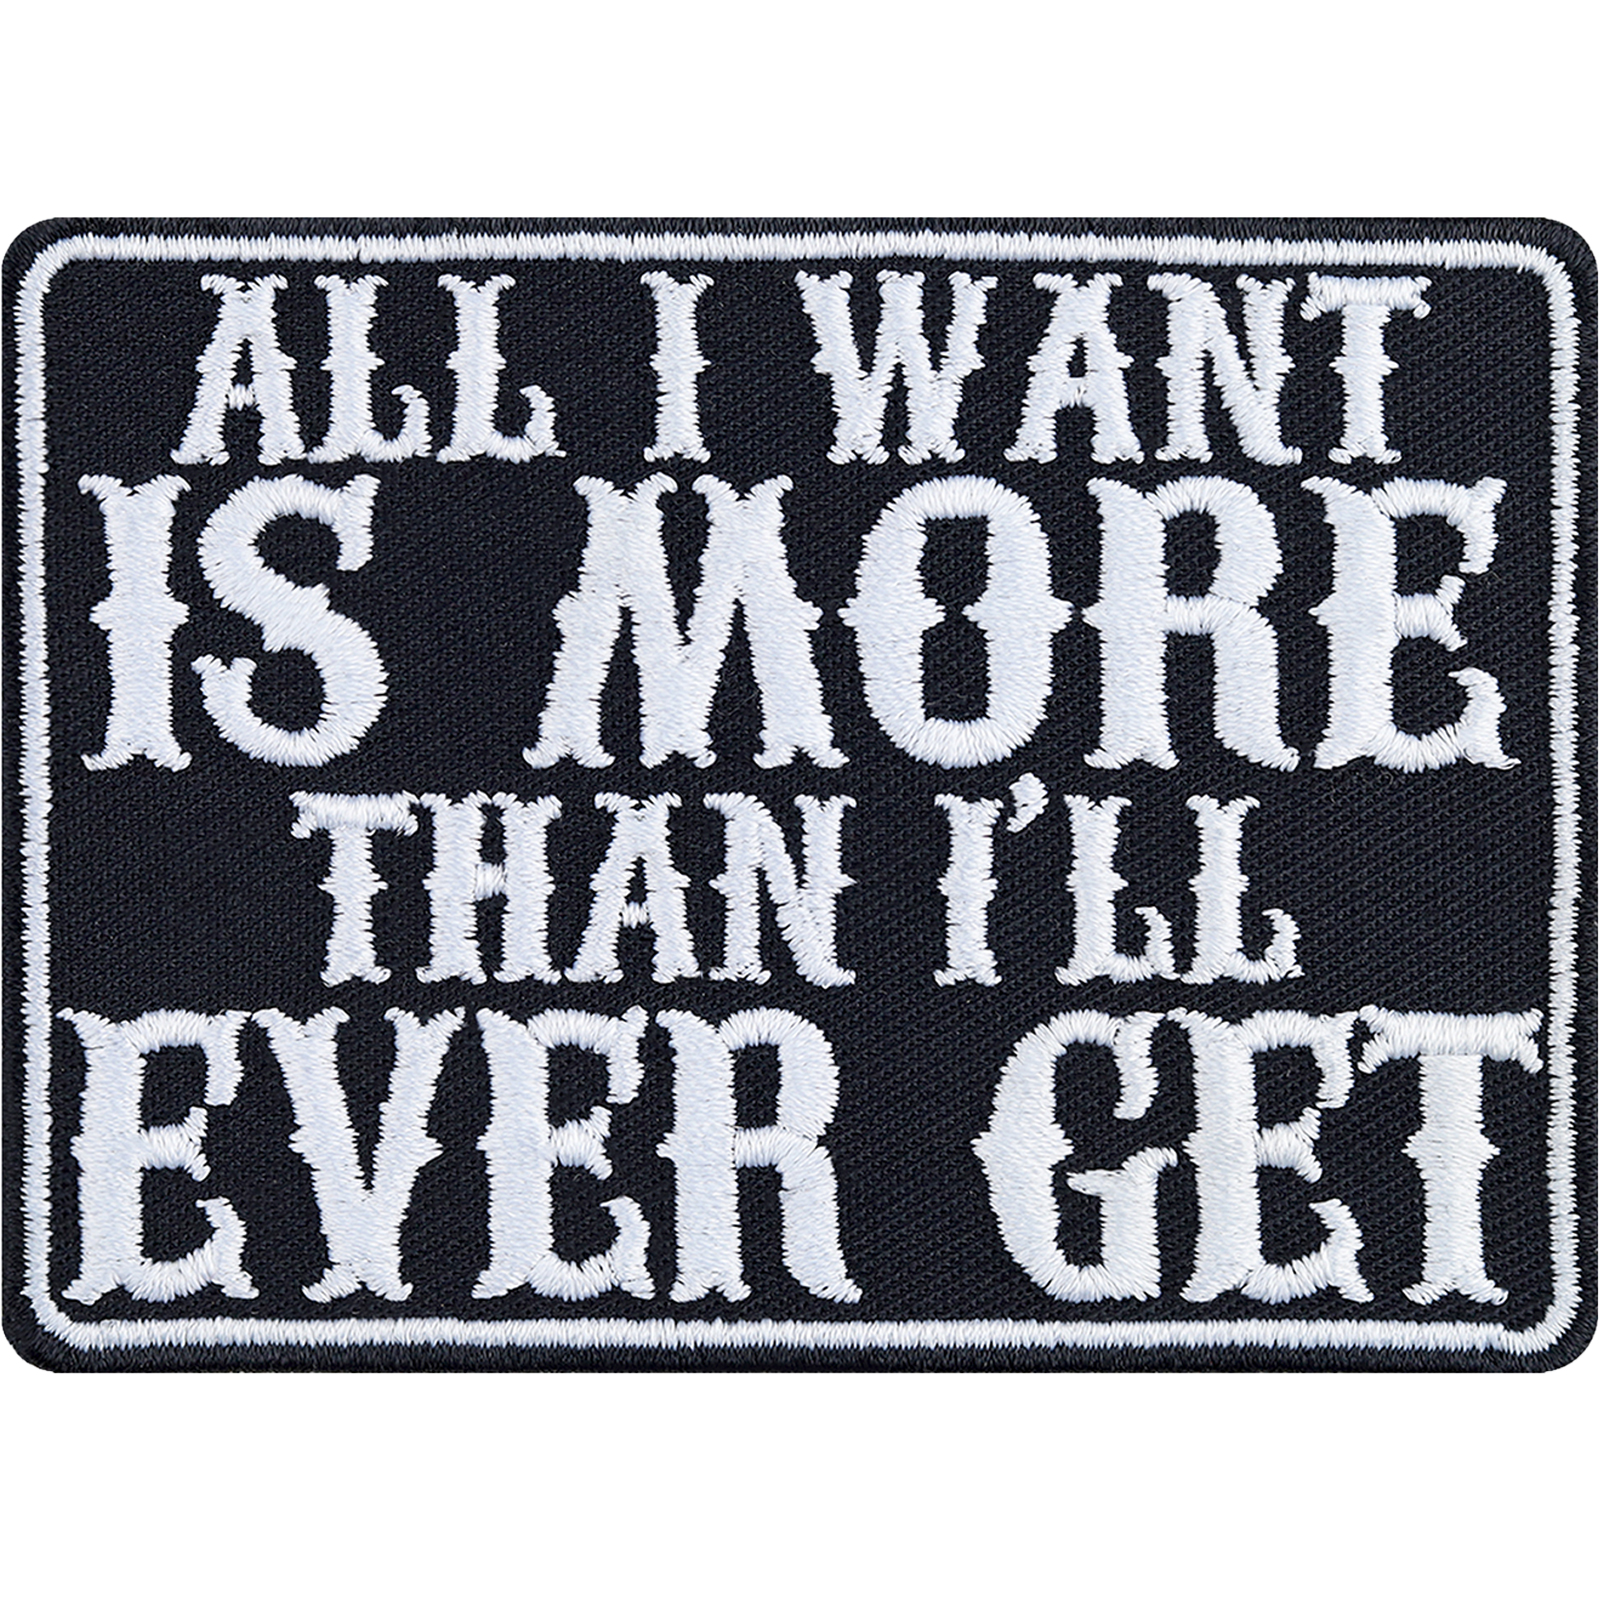 All I want is more than I'll ever get - Patch